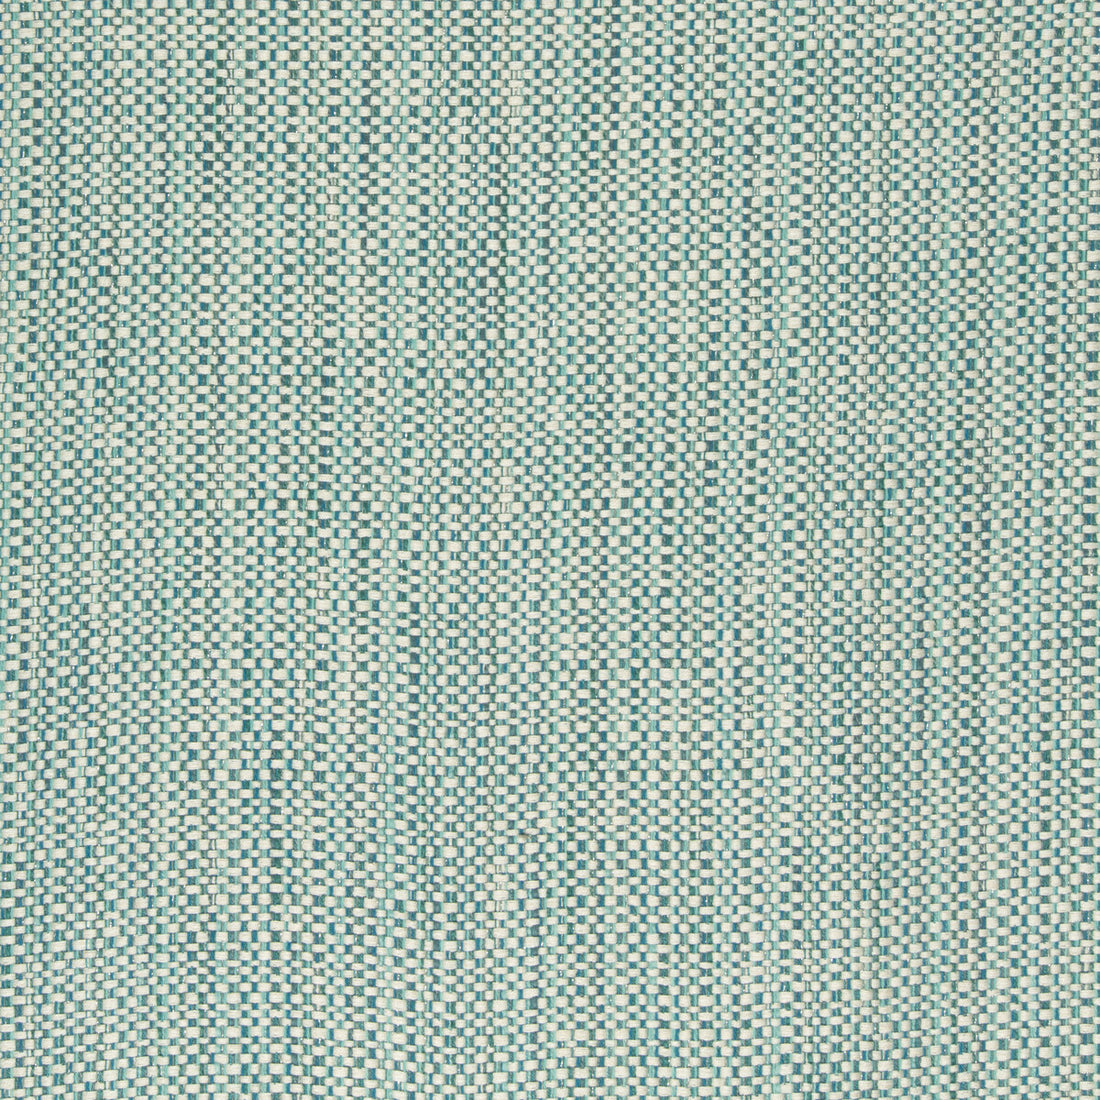 Kravet Design fabric in 34683-513 color - pattern 34683.513.0 - by Kravet Design in the Performance Crypton Home collection